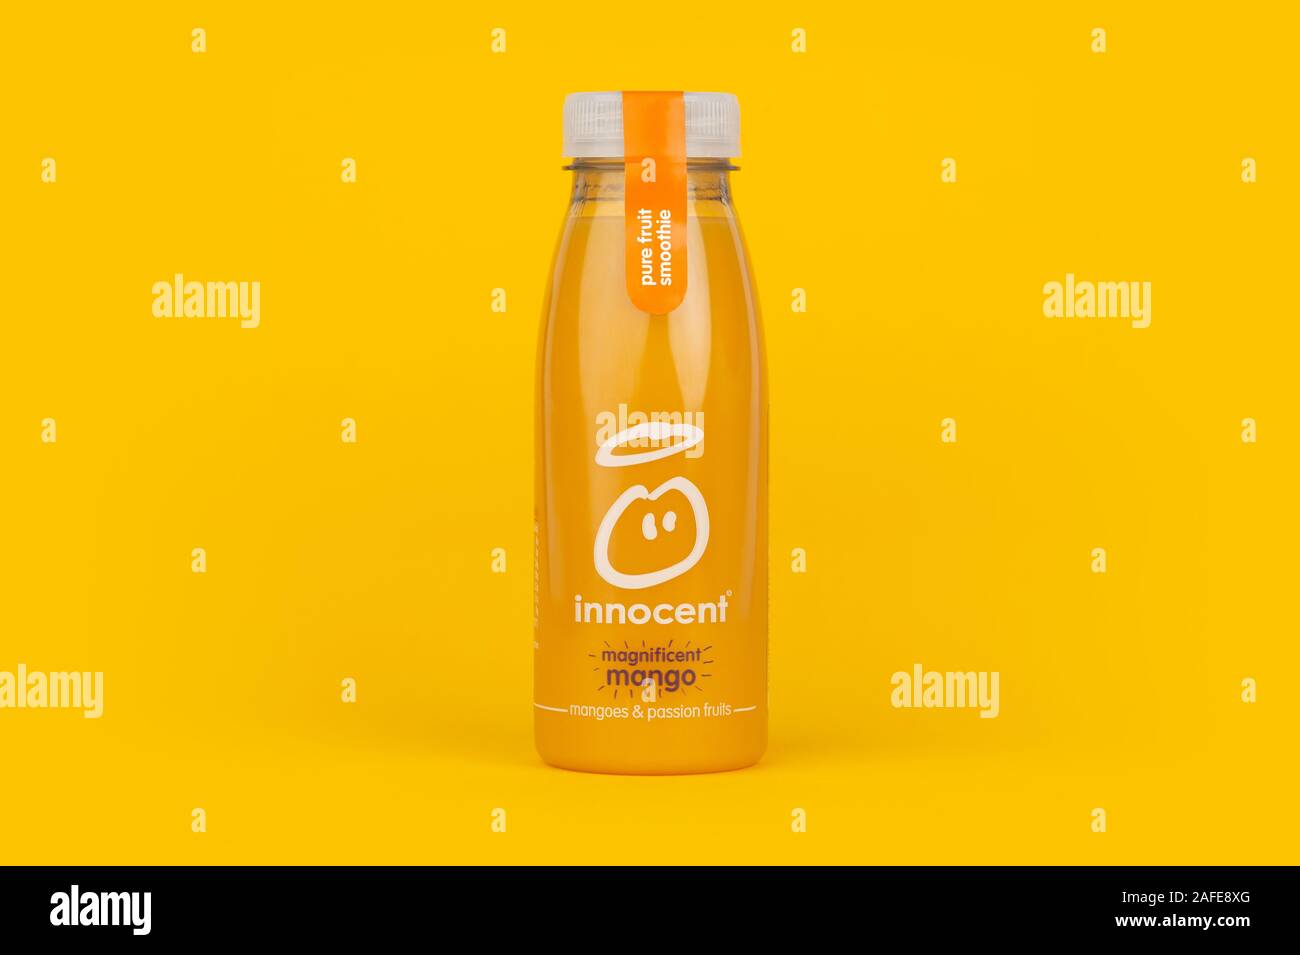 A bottle of Innocent Magnificent Mango smoothie drink shot on a yellow background. Stock Photo